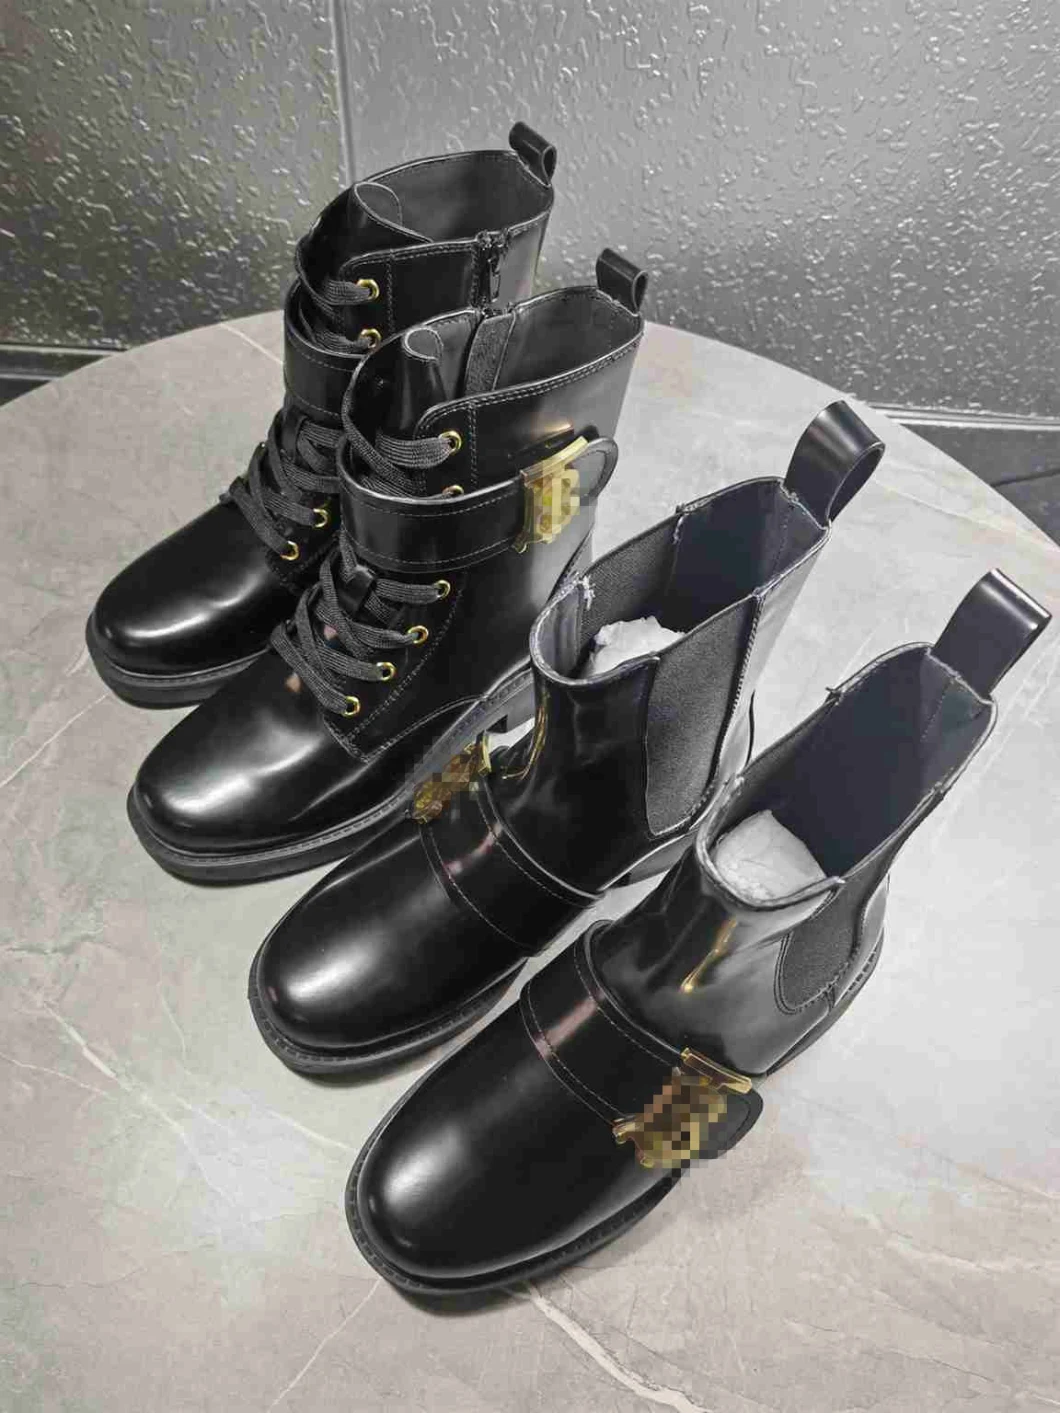 Brand New High Heel Short Boots Women Leather Ankle Boots for Women Pointed Toe